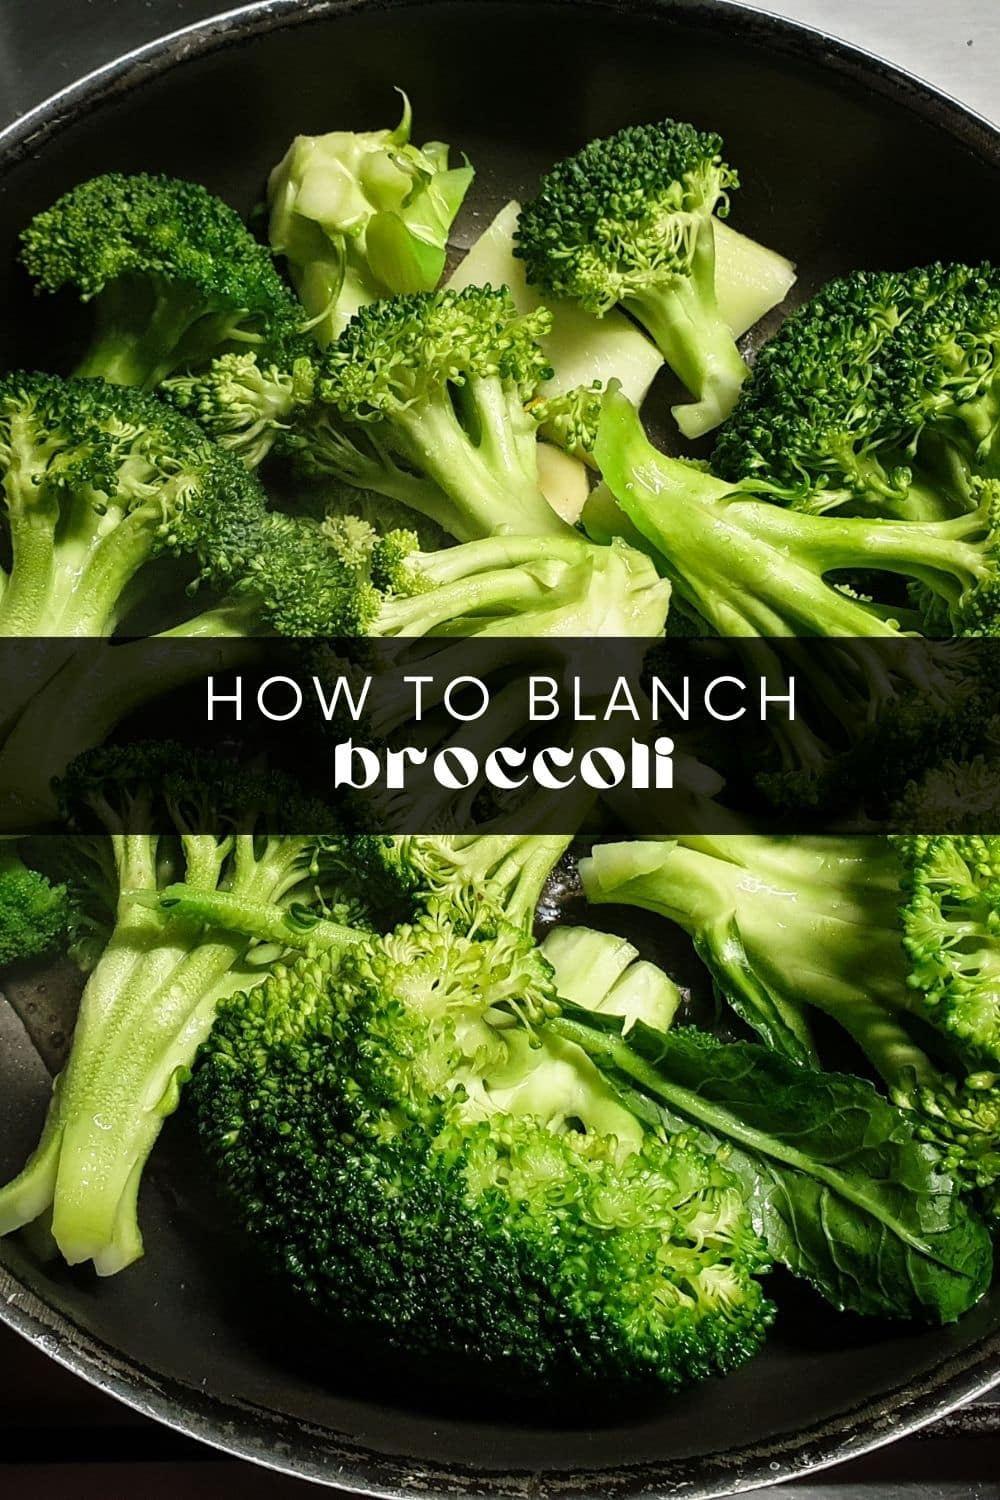 Blanching broccoli is a must-do step before freezing or adding it to your recipes. The results are always bright green, crisp-tender, and have the best flavor. This fail-safe method will help you achieve perfect broccoli every time! Here's how to blanch broccoli.